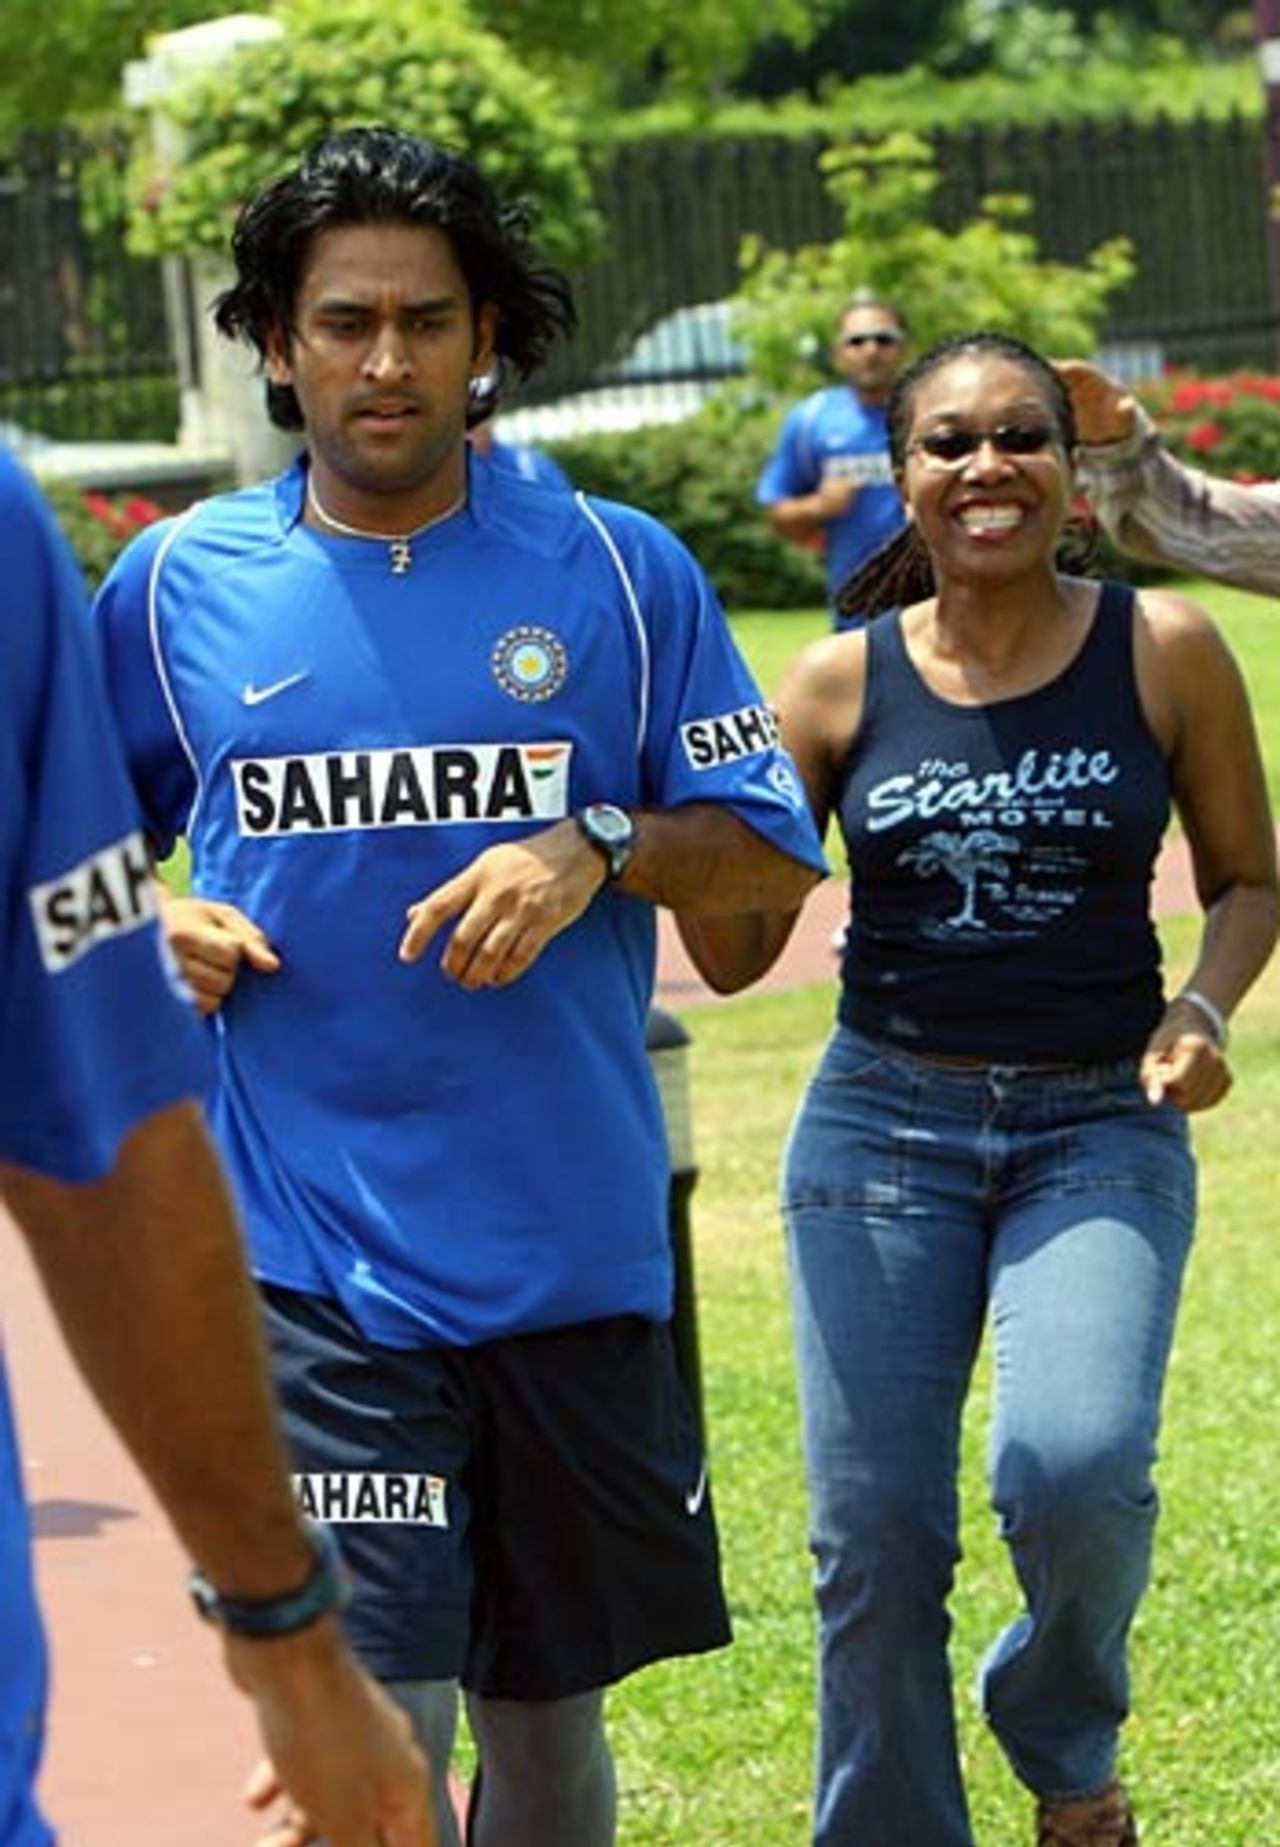 Mahendra Singh Dhoni jogs along with a fan as the Indians train at the start of their tour to West Indies, Kingston, May 13, 2006